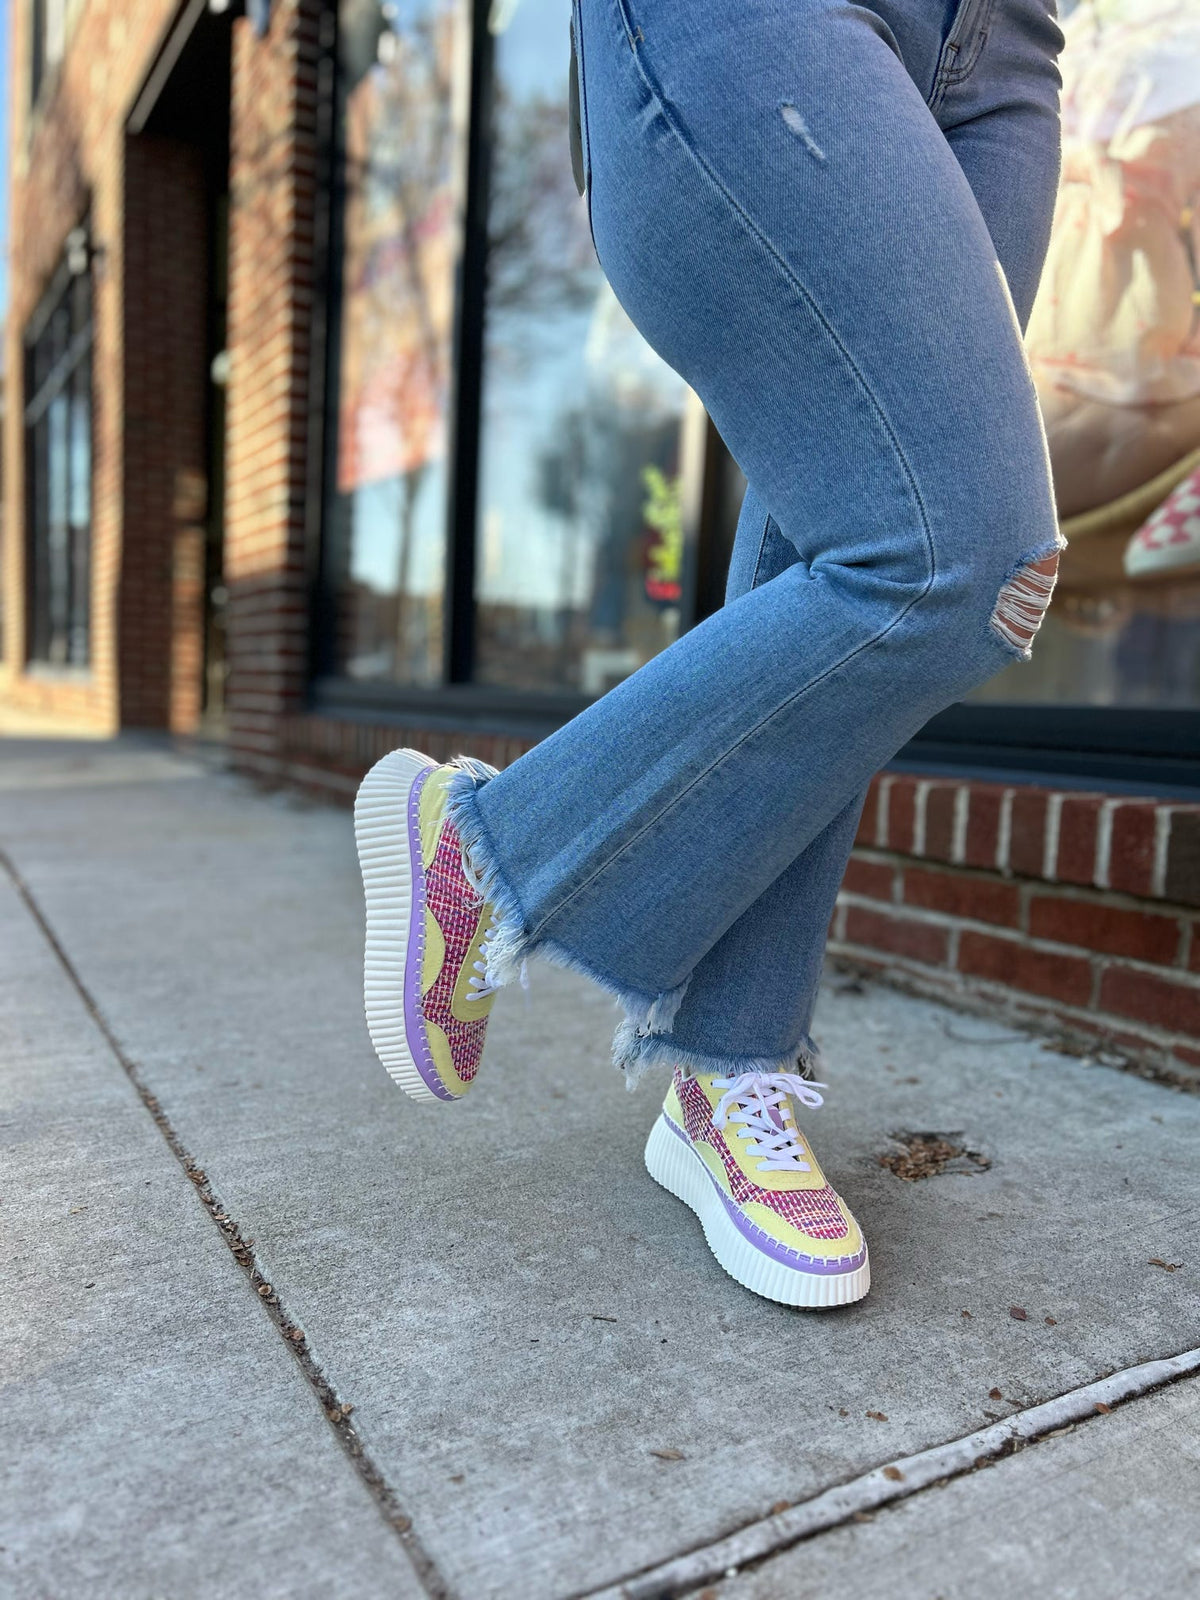 Colorful Woven Sneaker-220 Shoes-Matisse-Peachy Keen Boutique, Women's Fashion Boutique, Located in Cape Girardeau and Dexter, MO